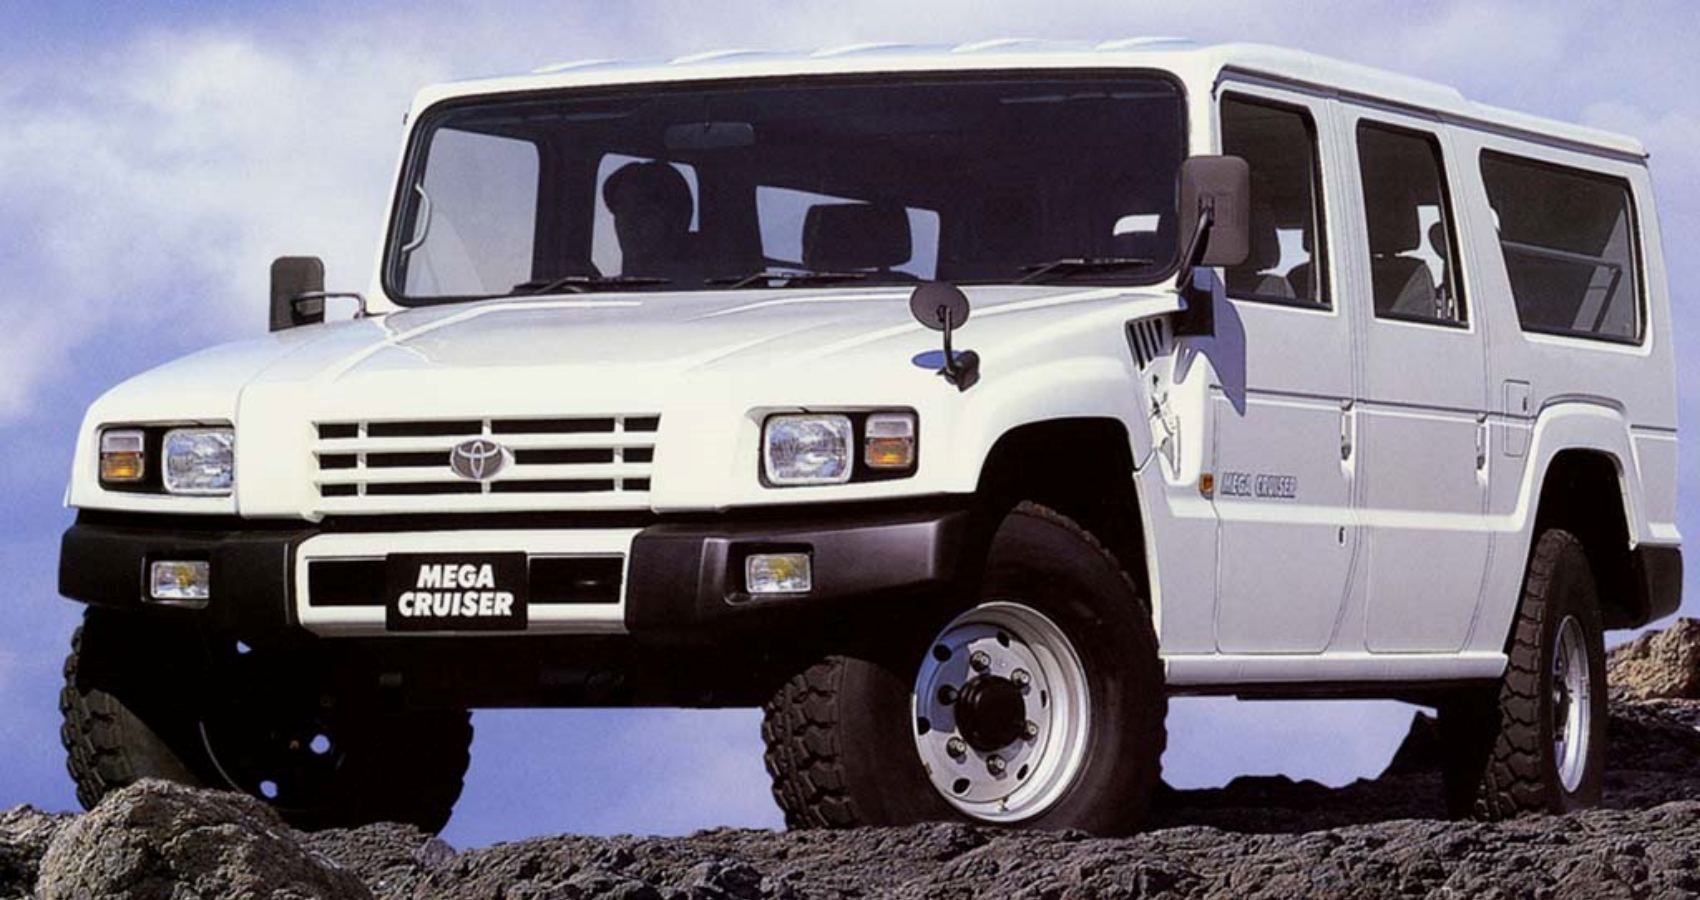 Here's How The Toyota Mega Cruiser Is More Outrageous Than The H1 Hummer